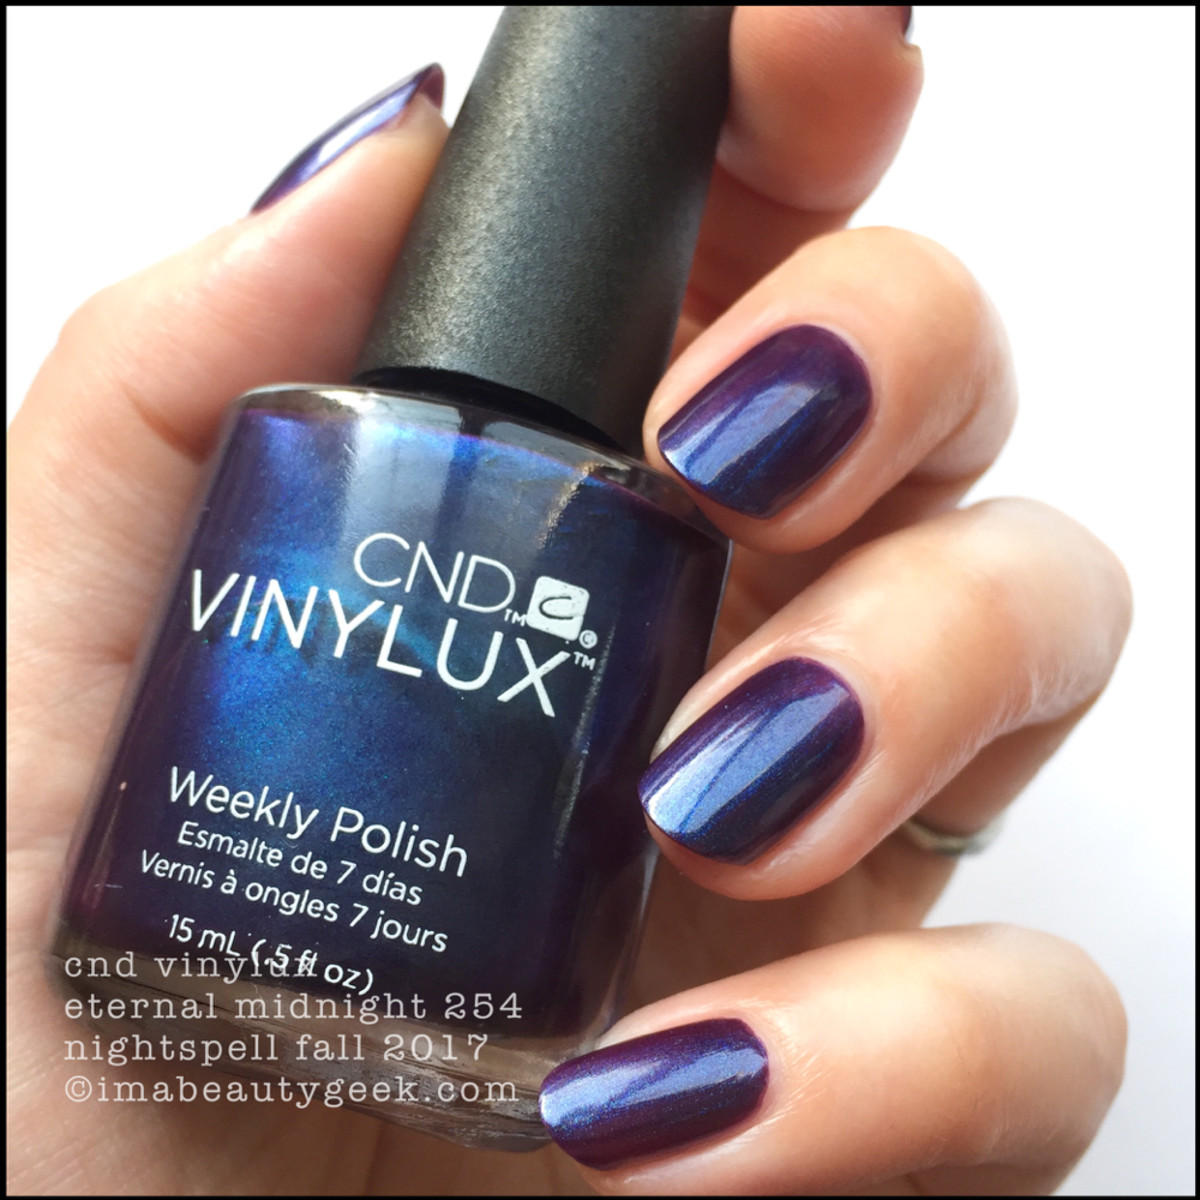 CND Vinylux Eternal Midnight - CND Vinylux Nightspell Fall 2017 Collection Swatches